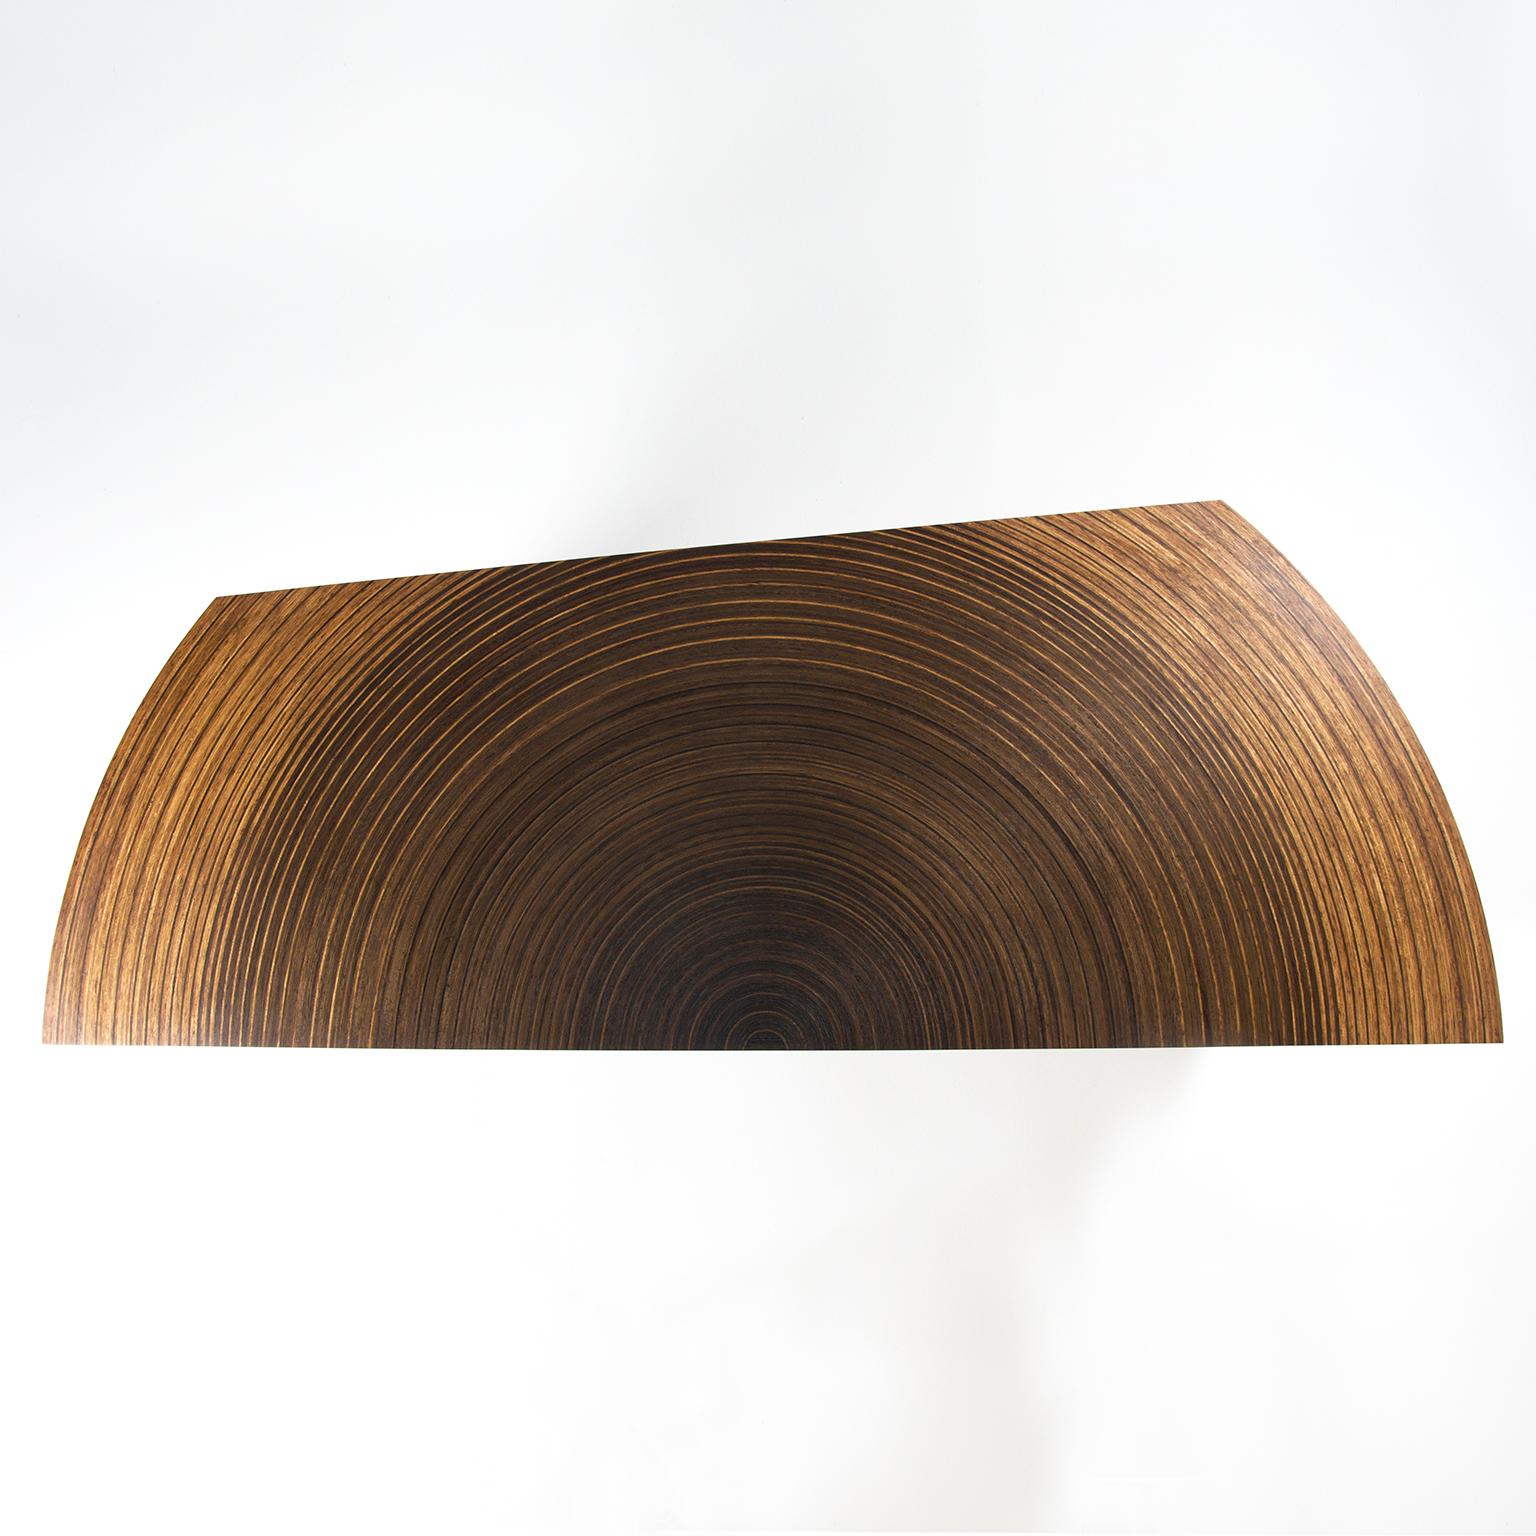 British Contemporary, Curved, Sculptural Desk made in Fumed Oak and Brown Oak For Sale